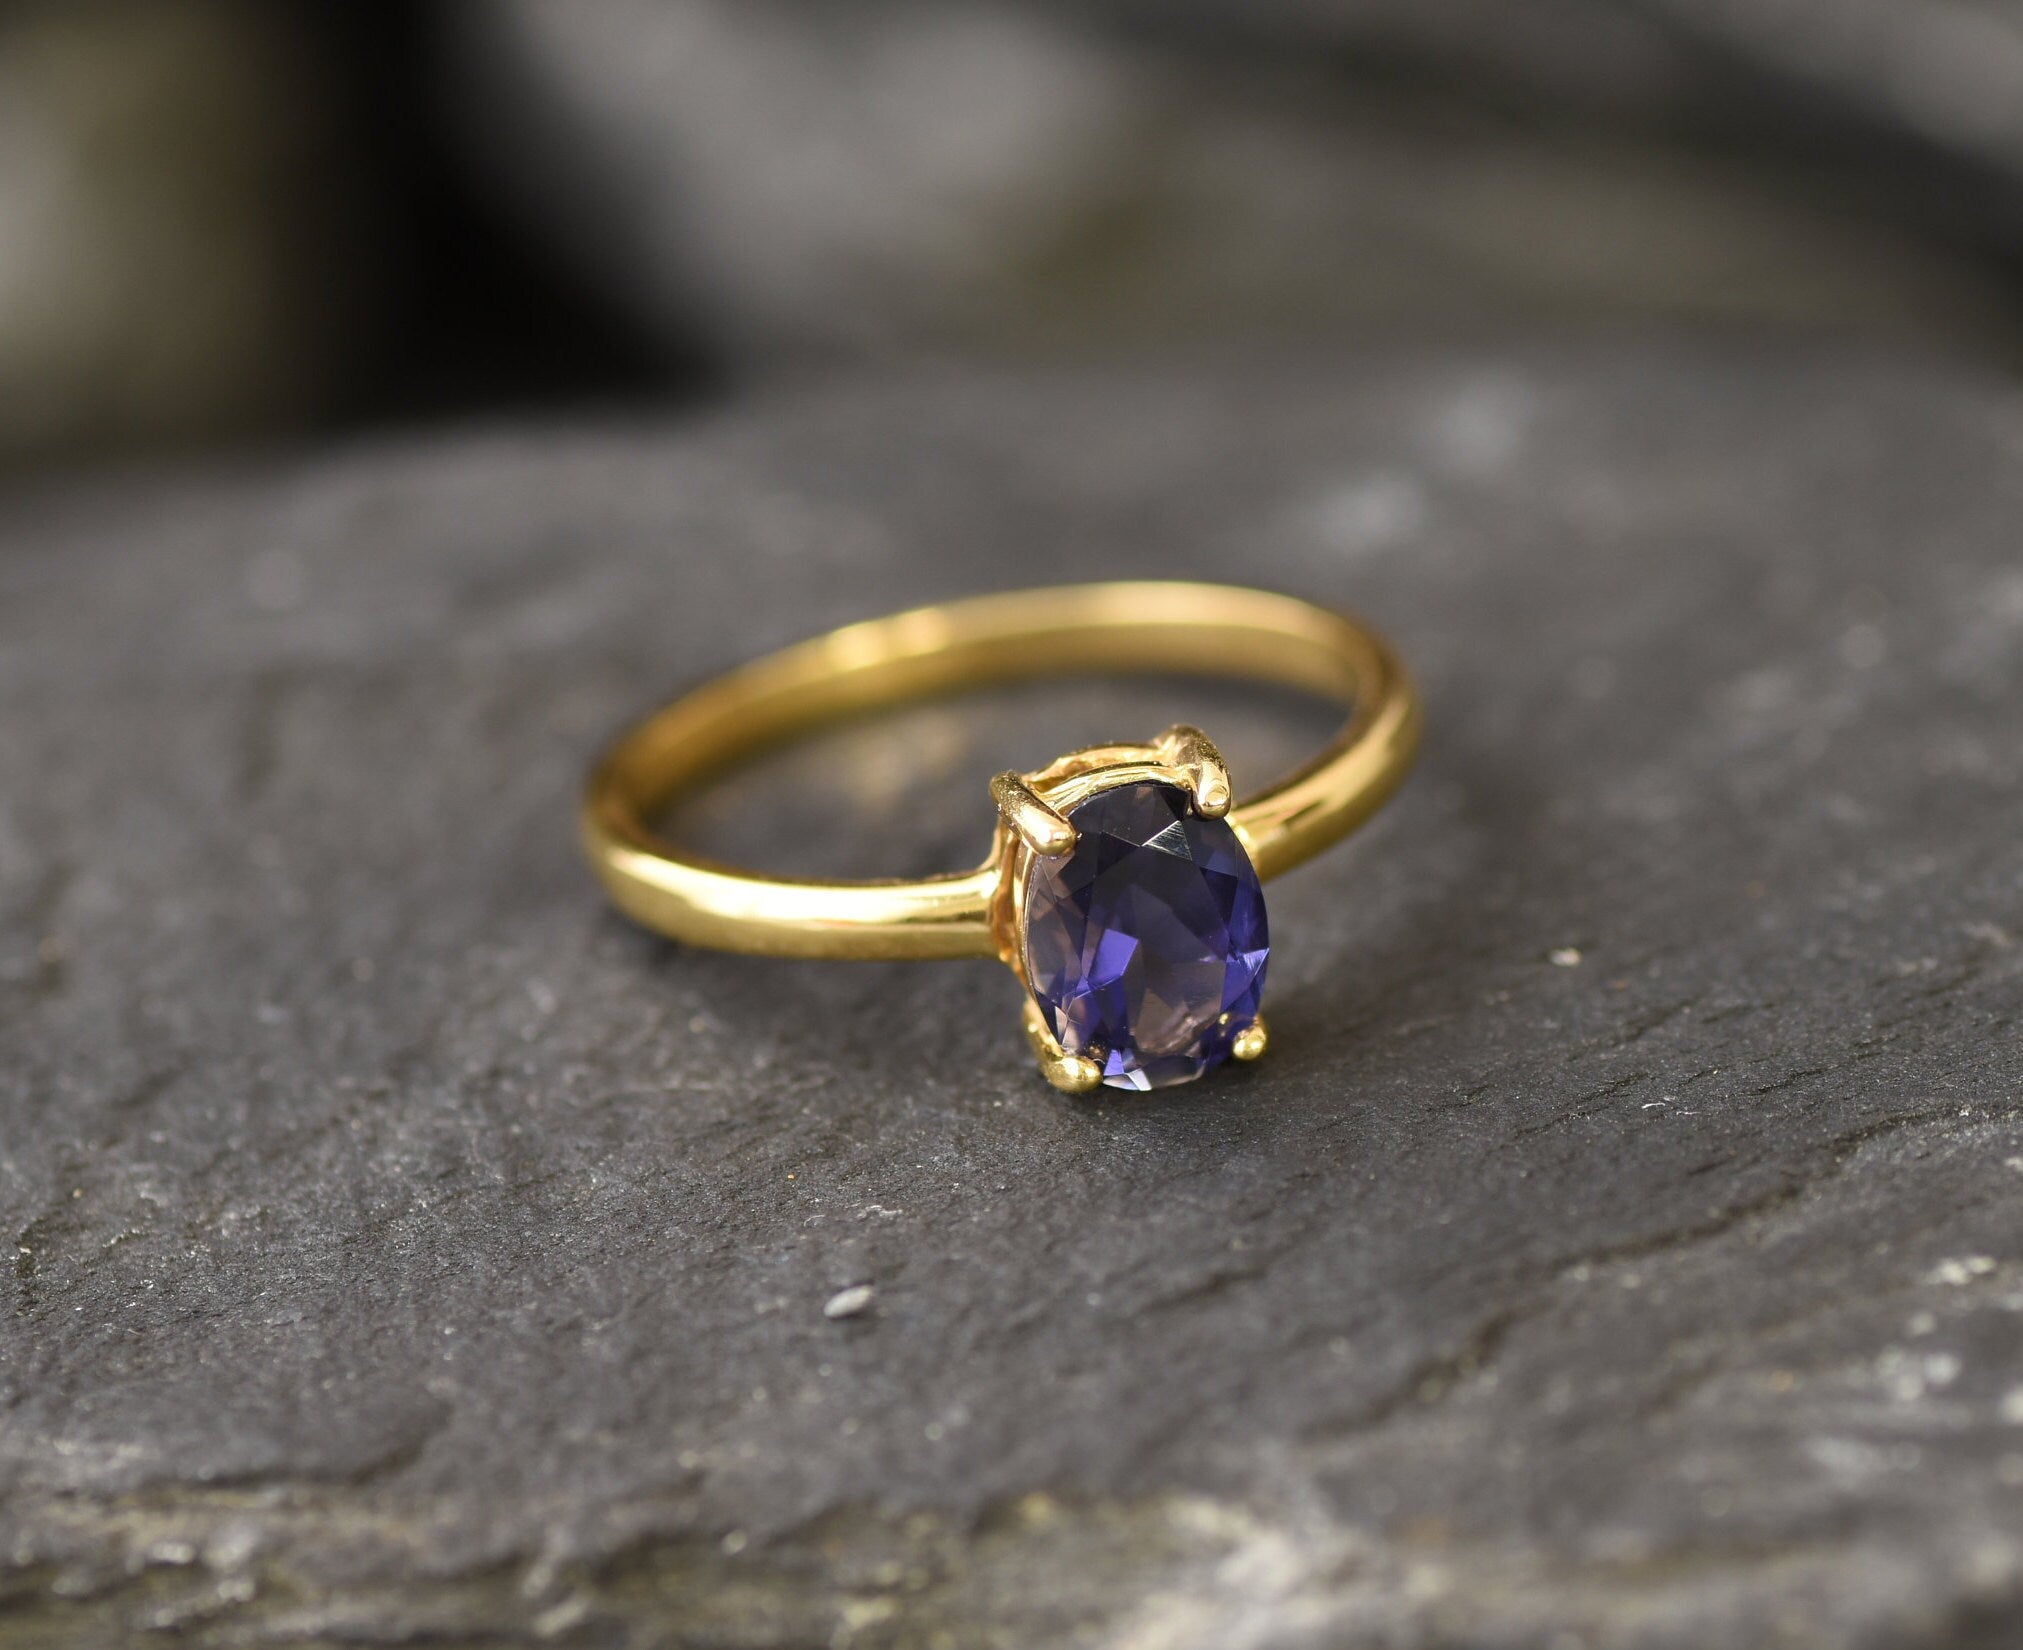 Gold Iolite Ring, 2 Carat Solitaire, Purple Ring, Natural Iolite, Gold Plated Ring, Promise Ring, Proposal Ring, Dainty Ring, Vermeil Ring